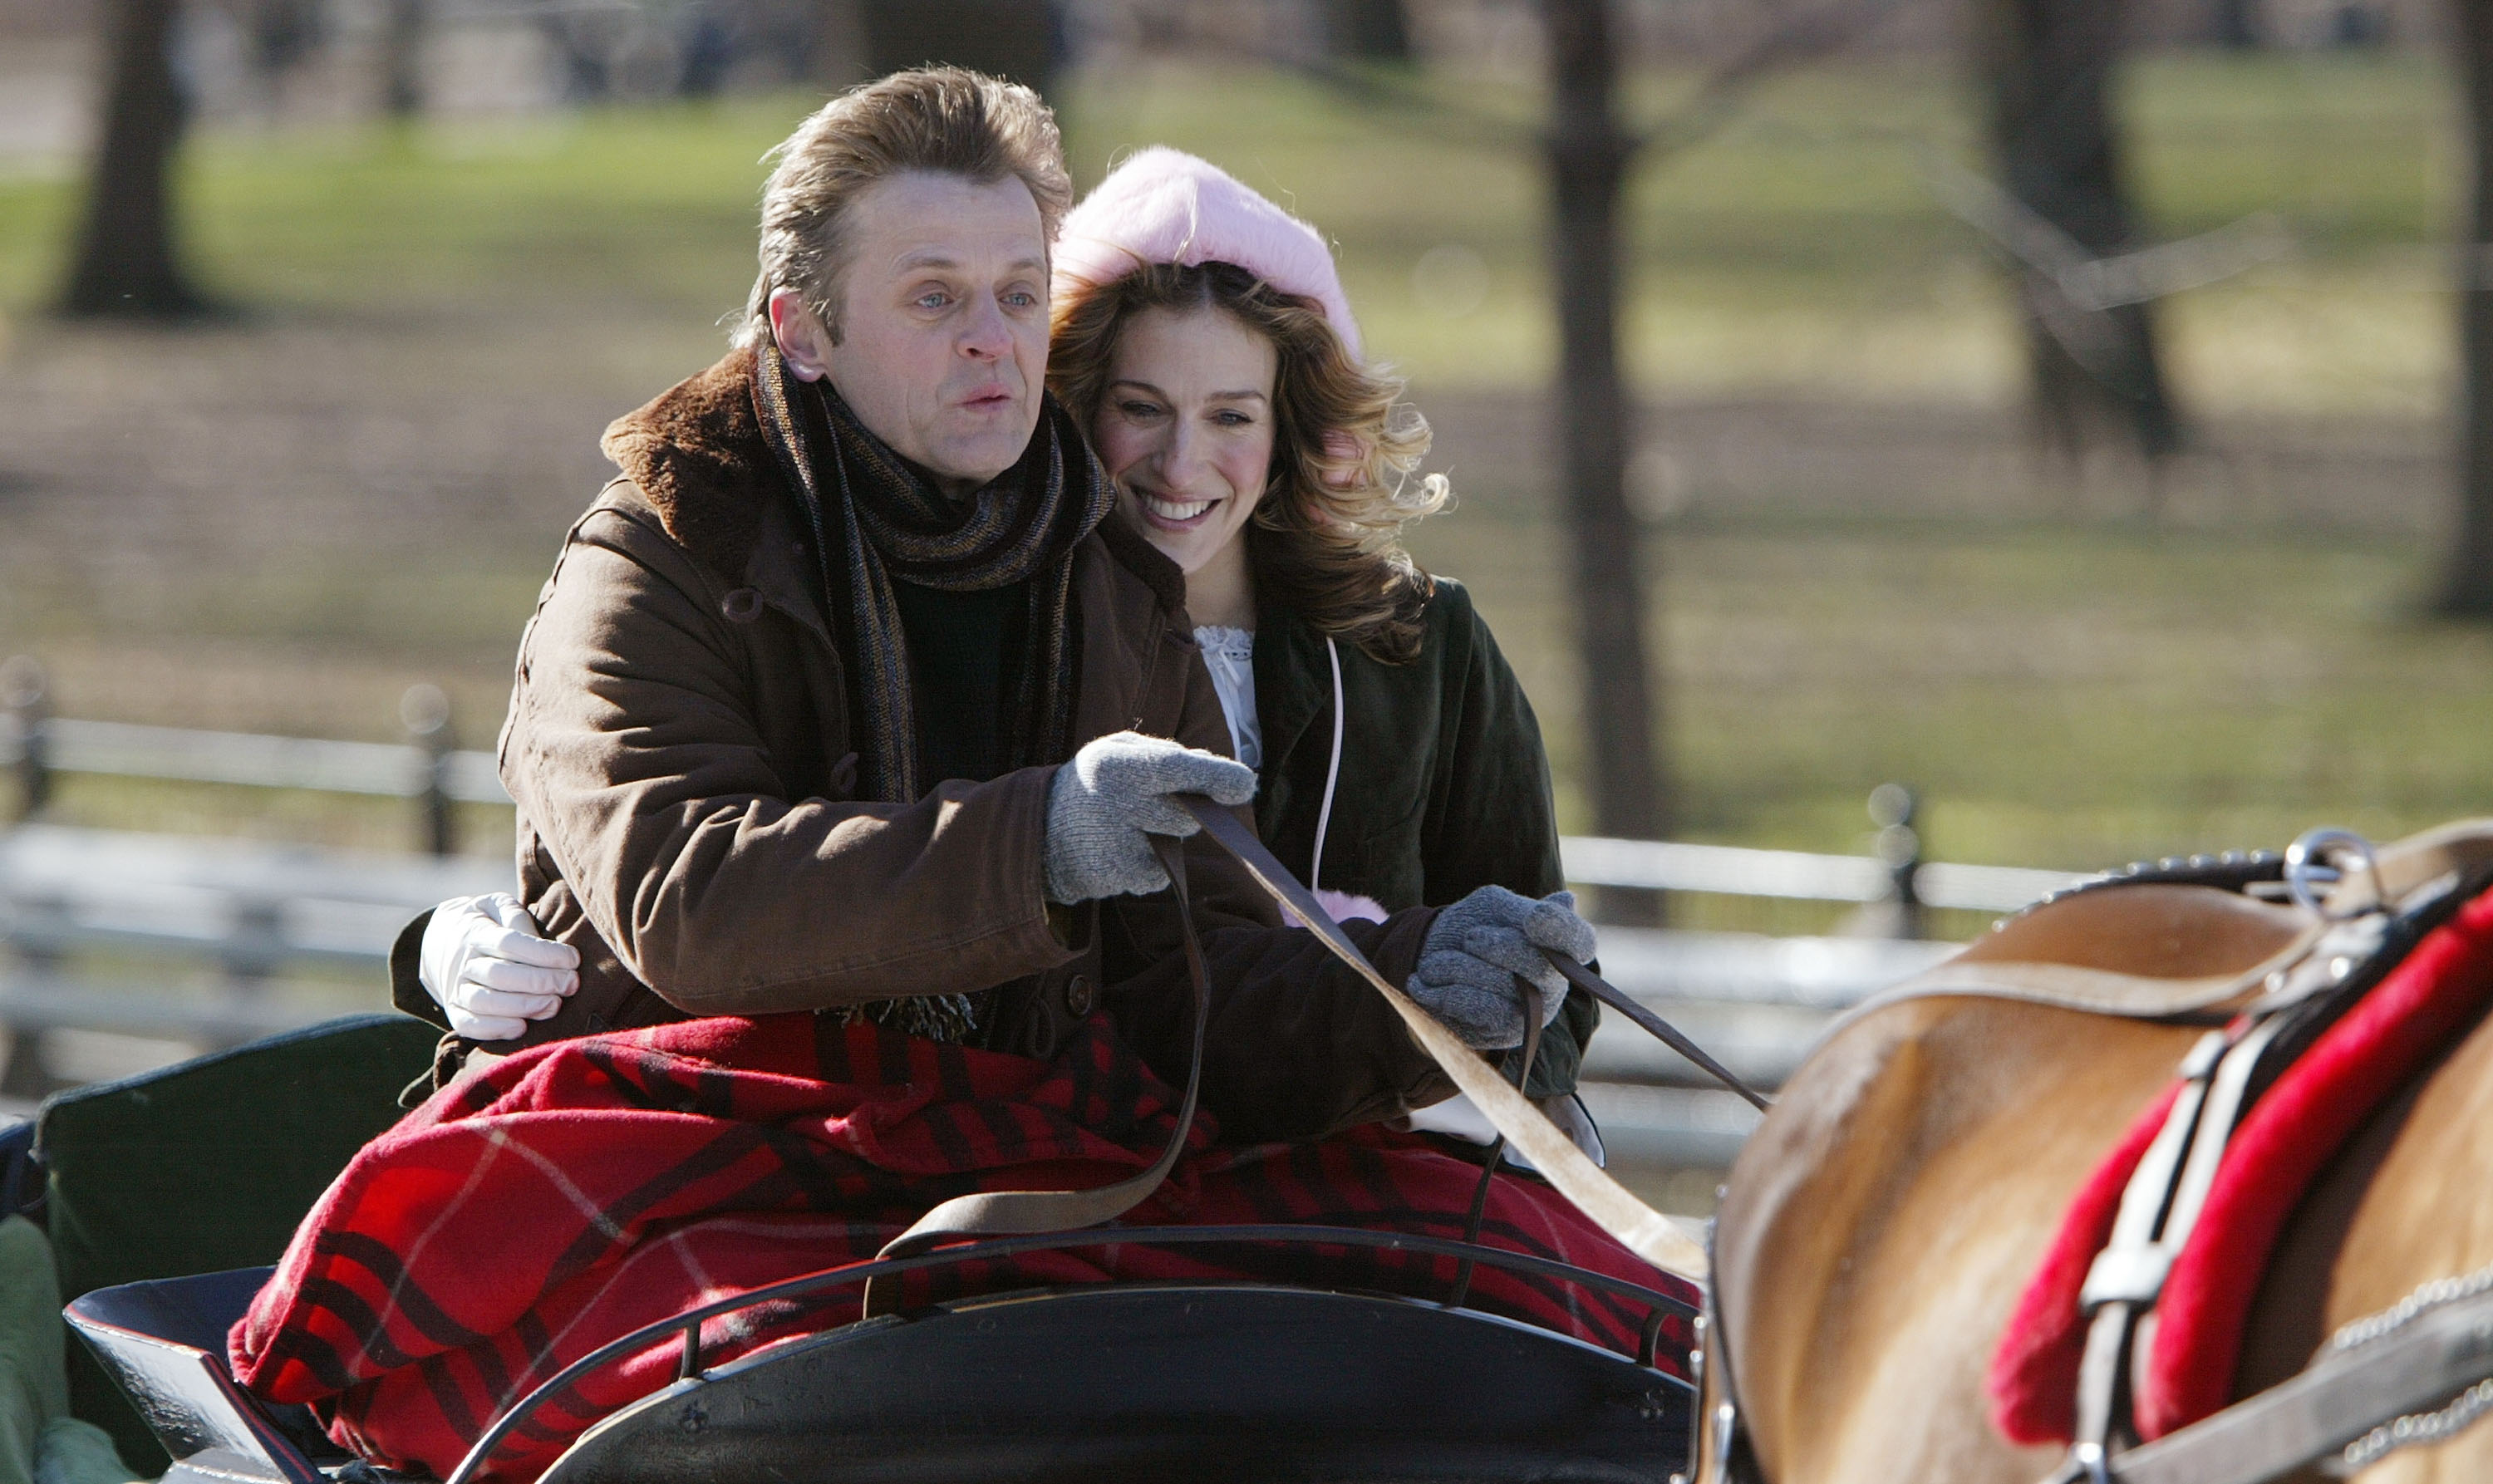 Sarah Jessica Parker and Mikhail Baryshnikov film a scene for 'Sex and the City' in Central Park. Alek serverd as one of Carrie Bradshaw's boyfriends during the show's final season. 